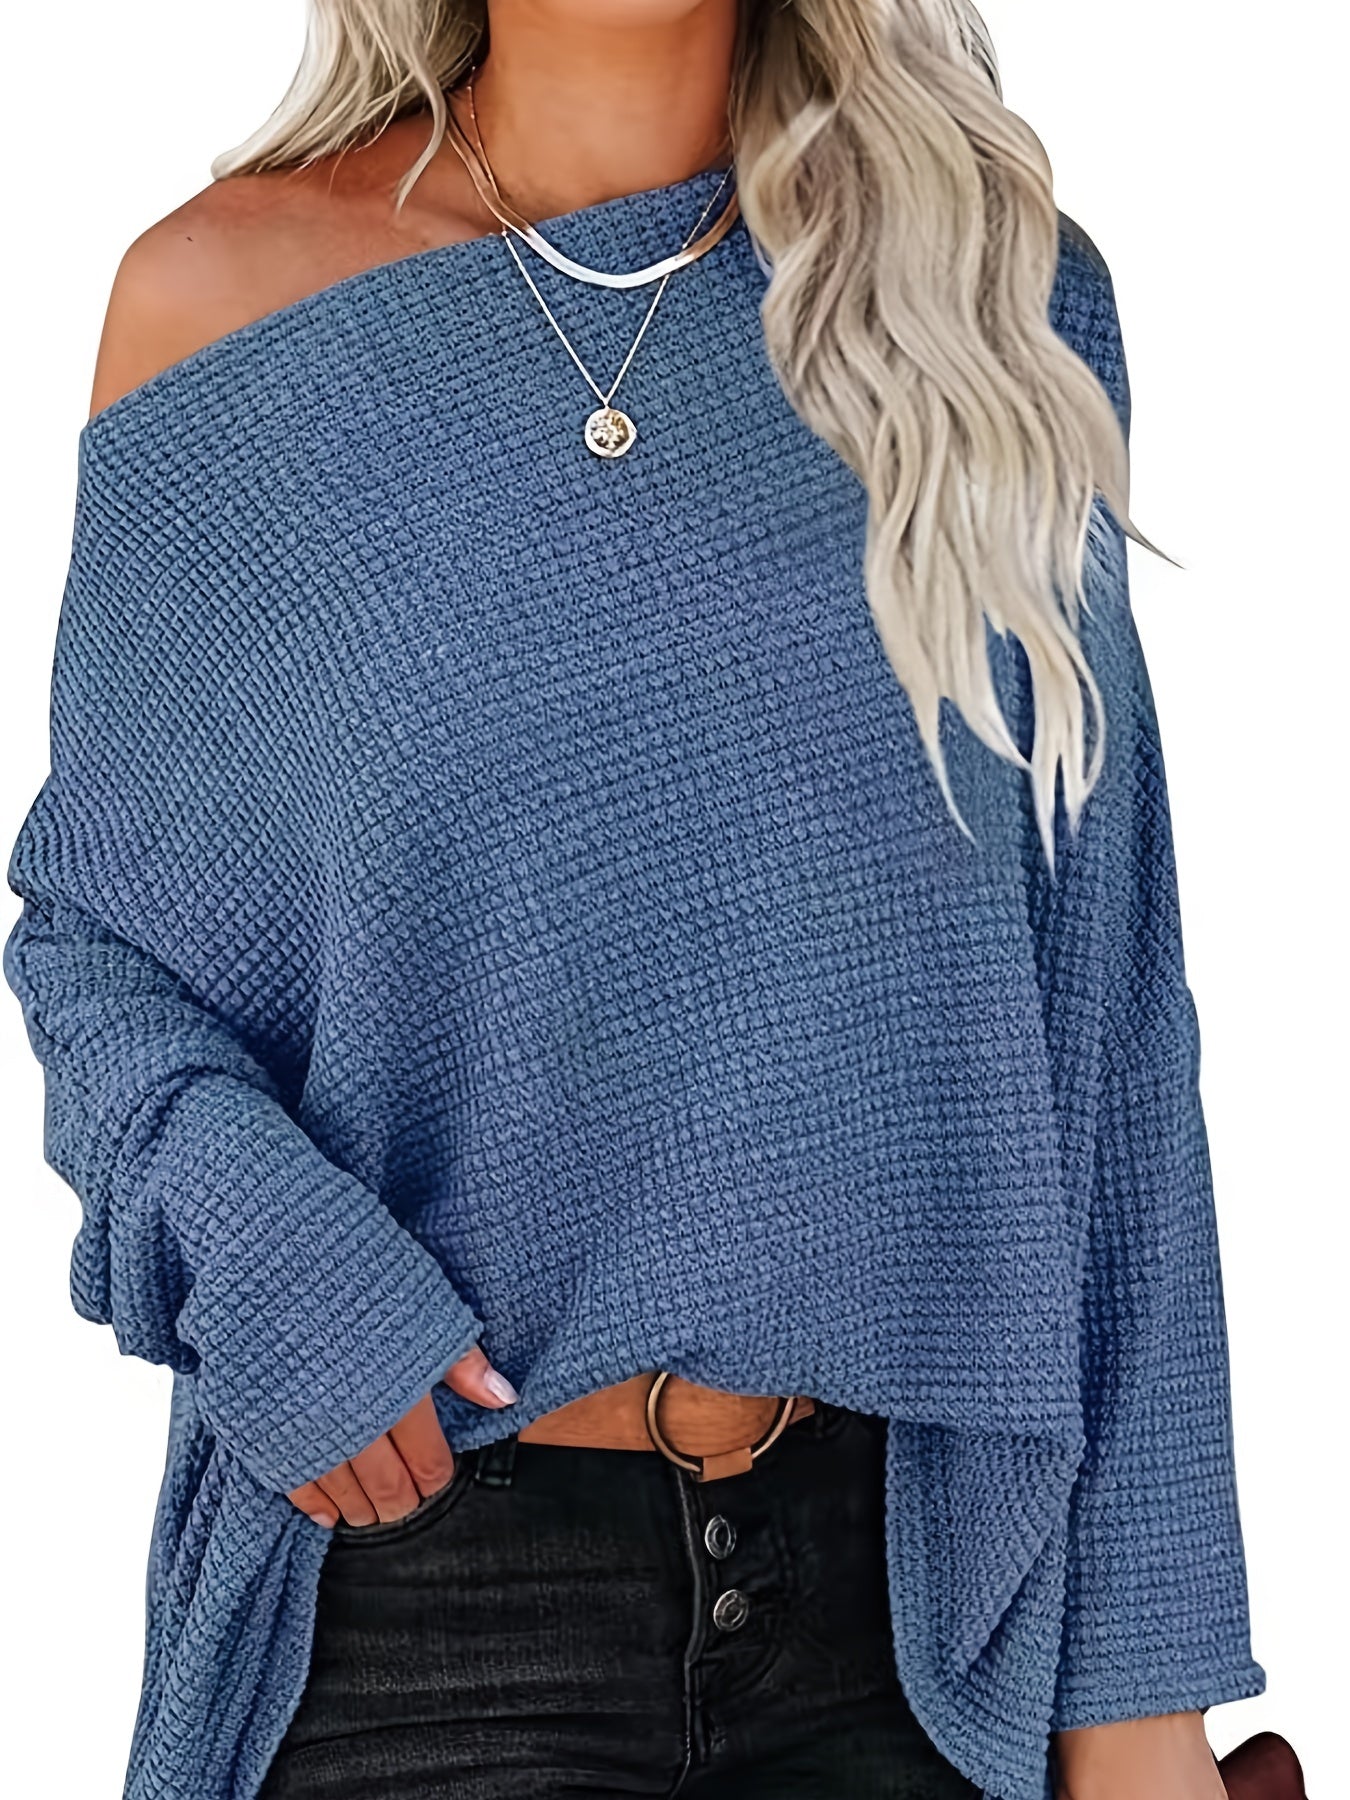 Antmvs Women's Casual Off Shoulder Bat Long Sleeve Waffle Knitted Oversized Pullover Sweater, Casual Tops For Fall & Winter, Women's Clothing